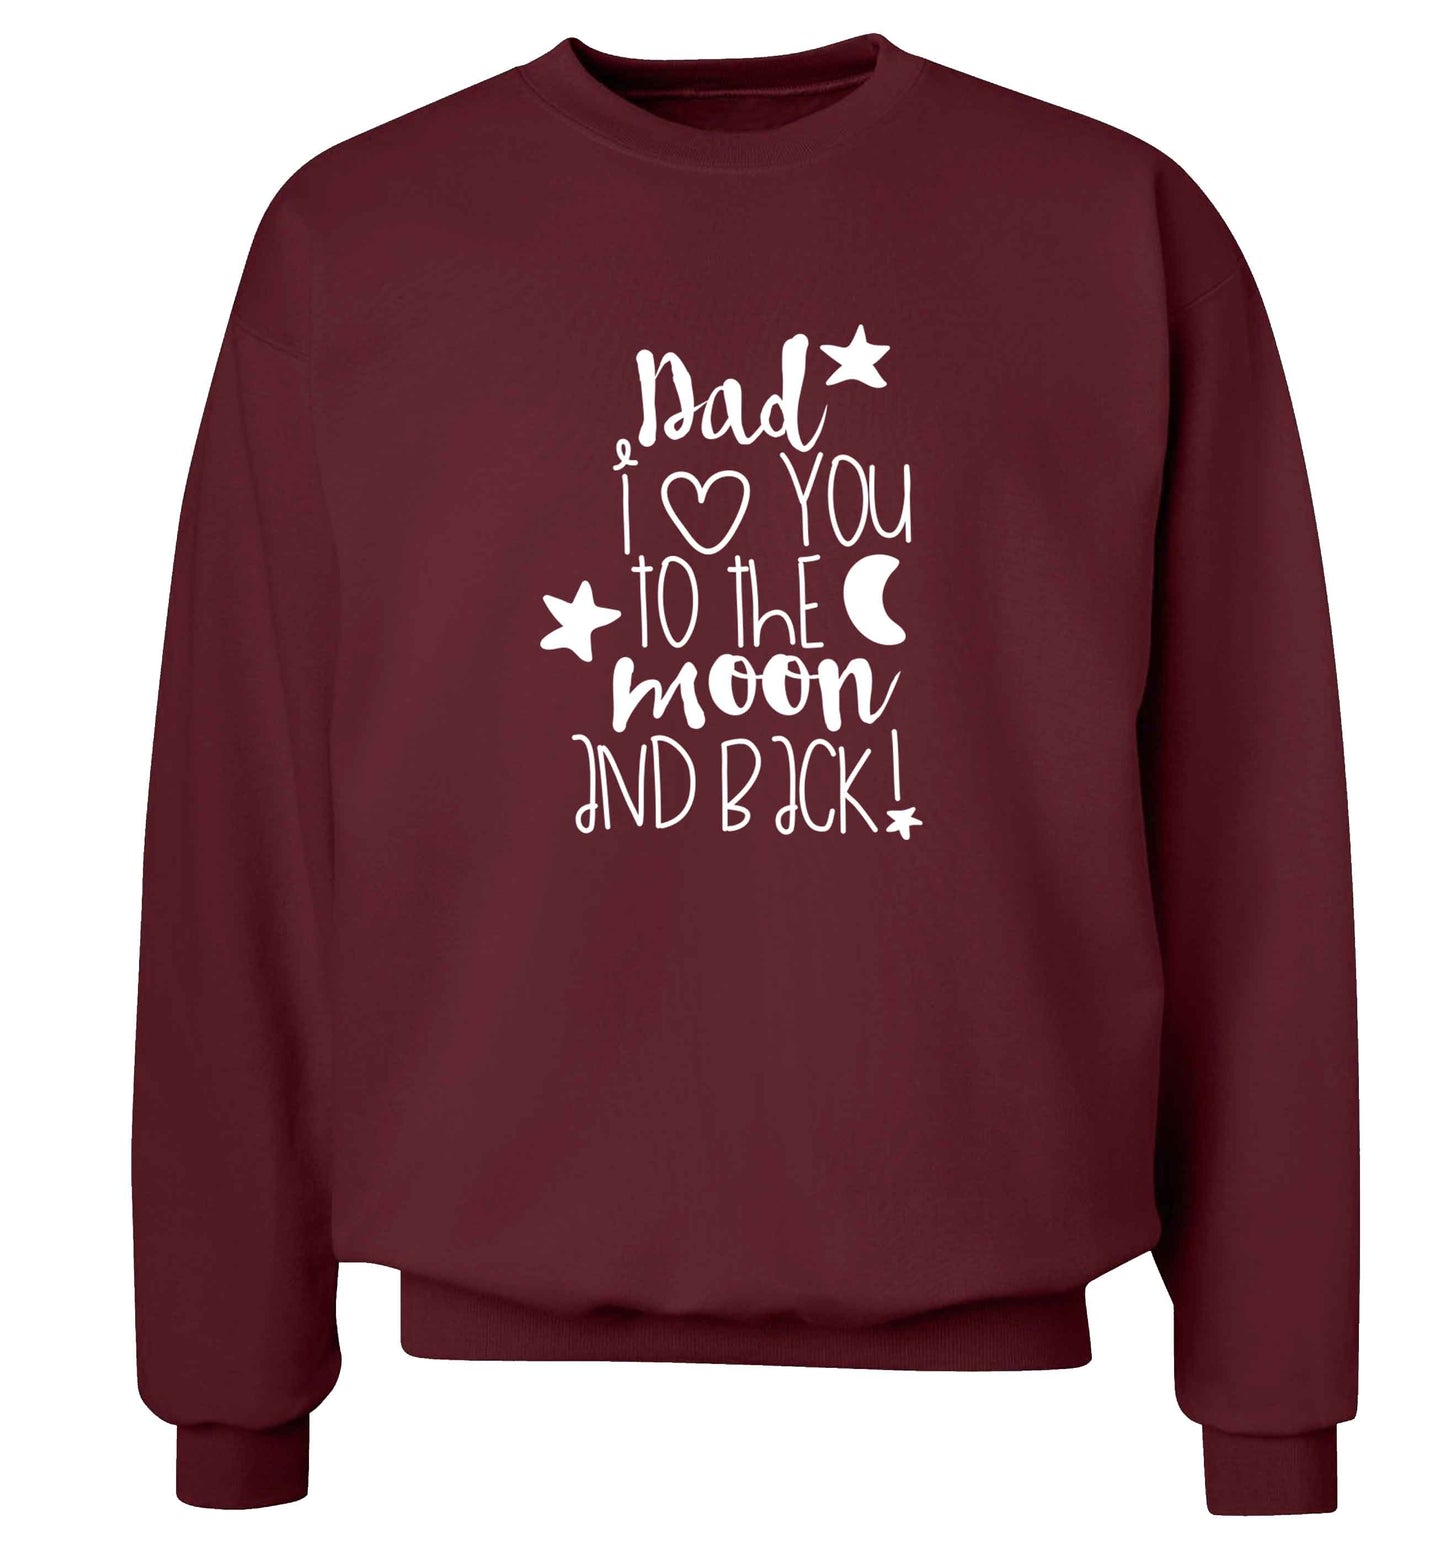 Dad I love you to the moon and back adult's unisex maroon sweater 2XL